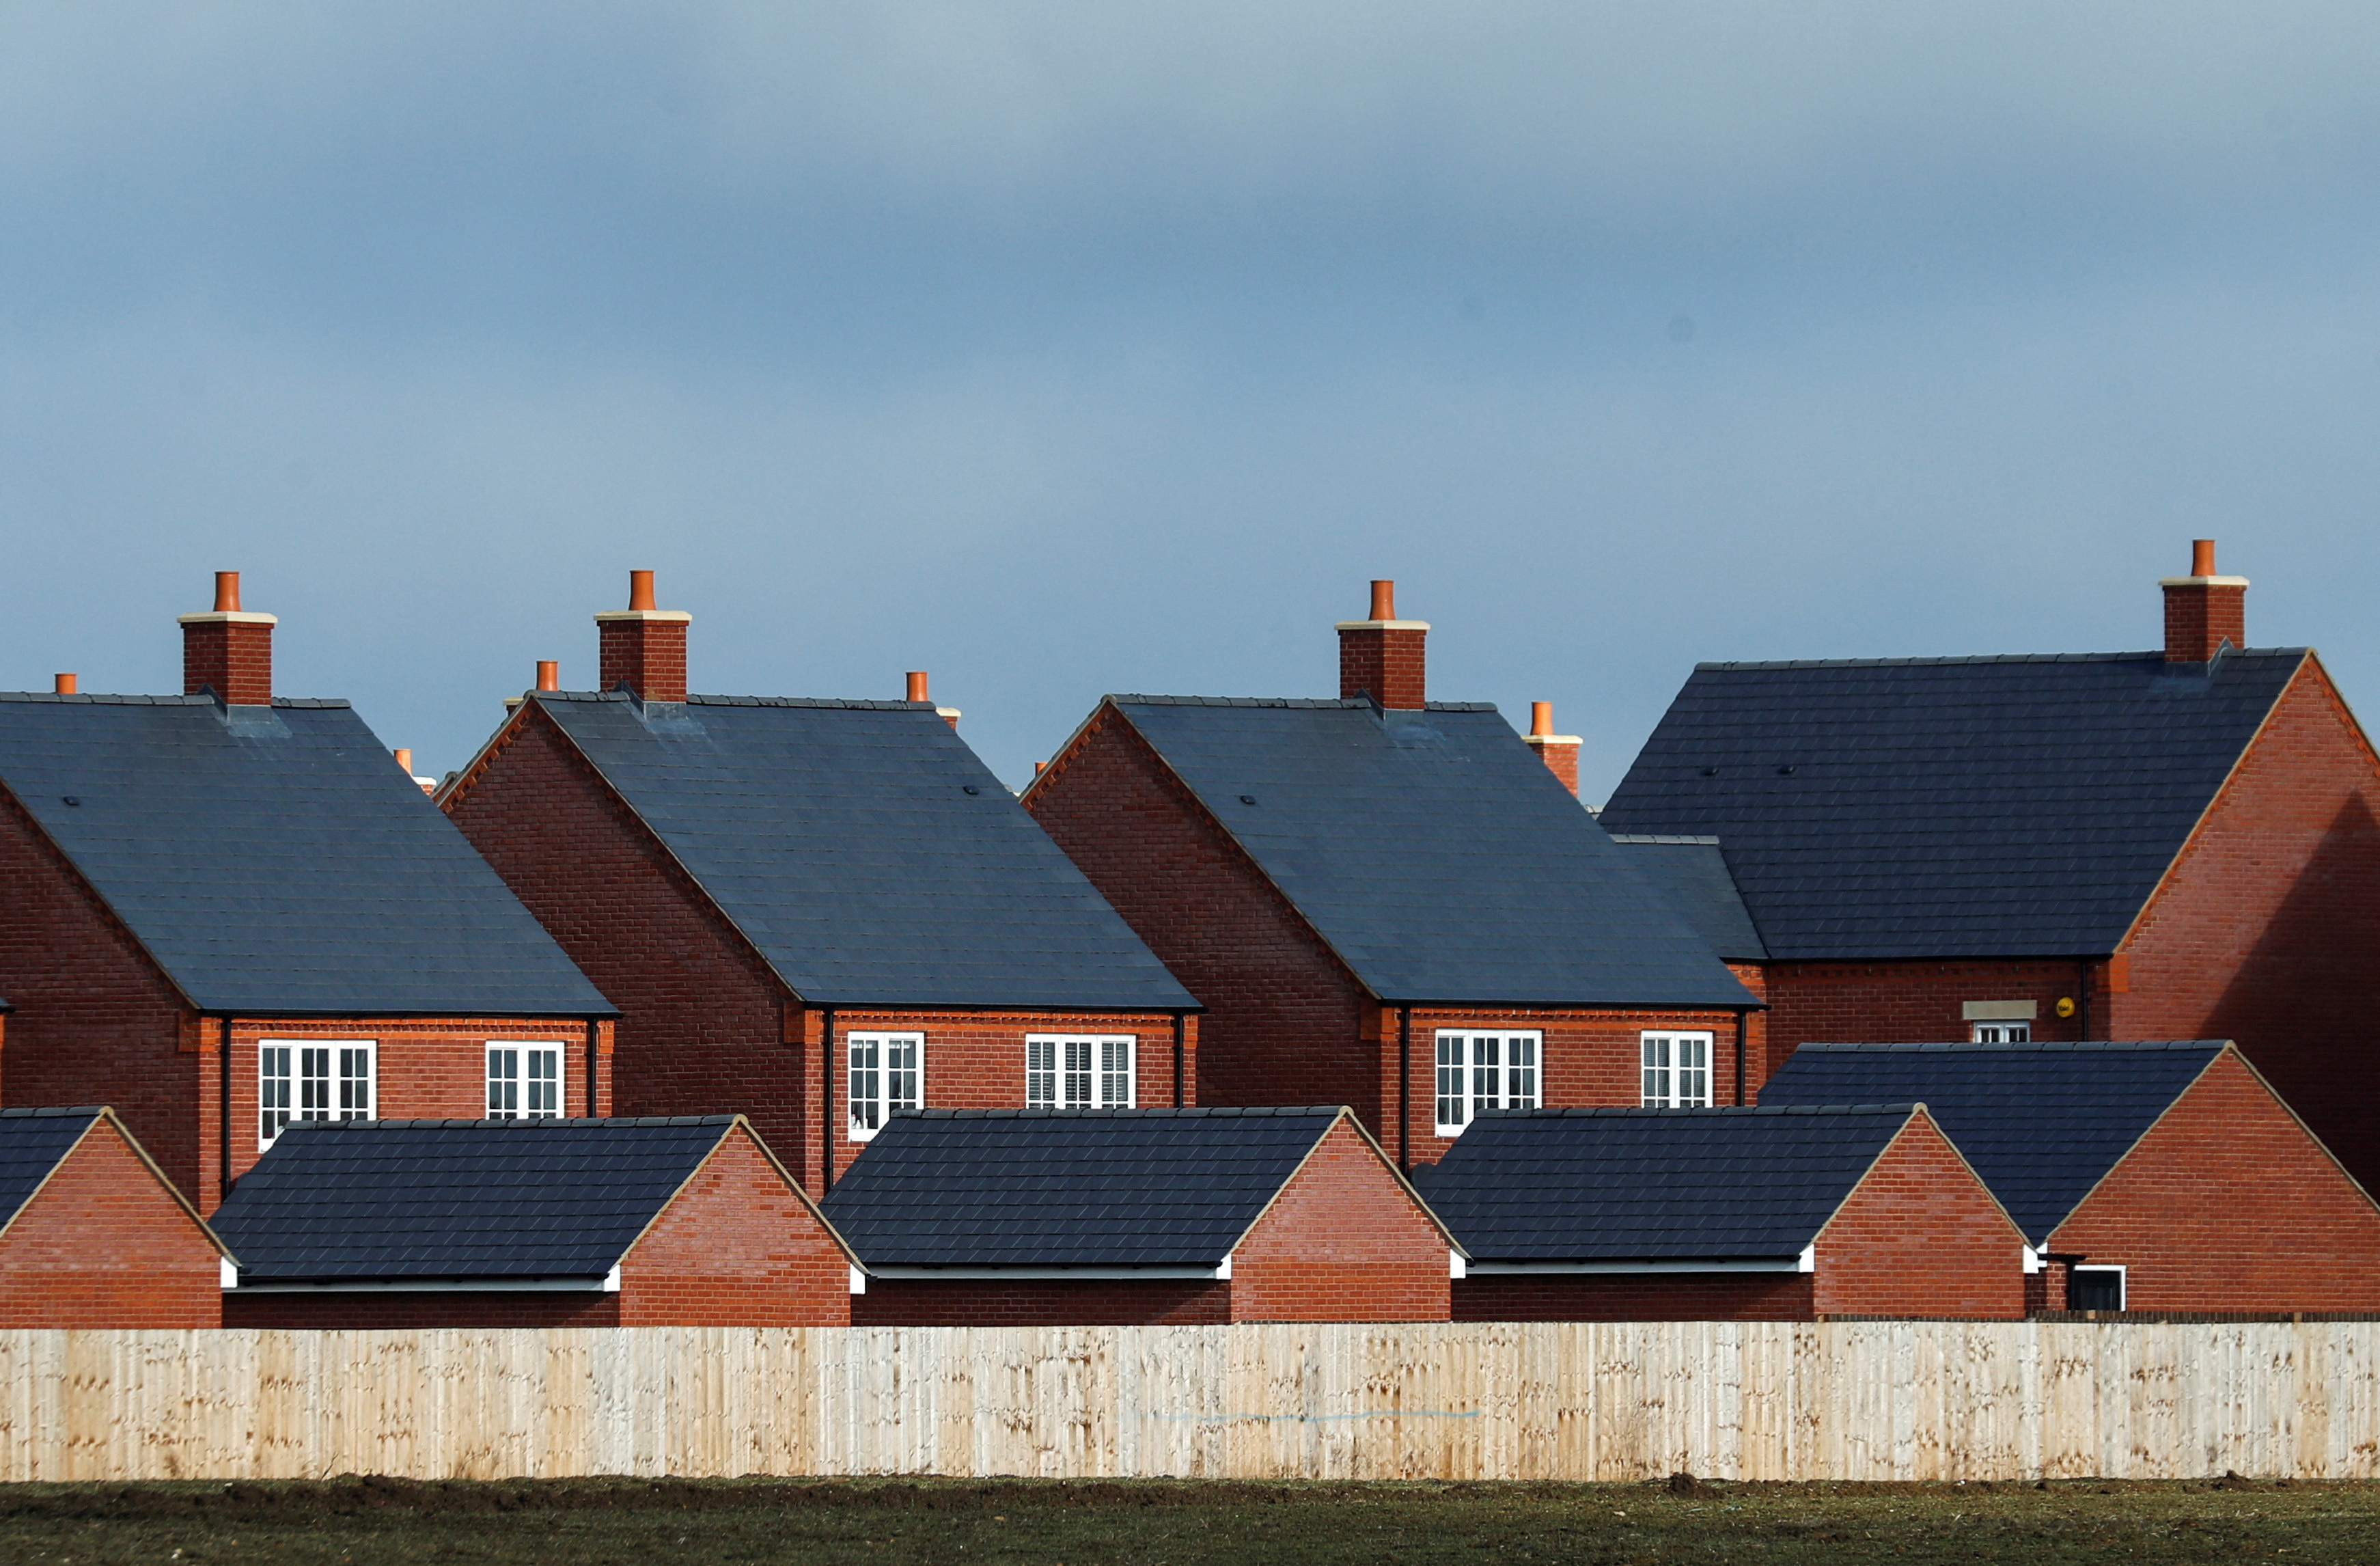 New residential homes are seen at a housing estate in Aylesbury